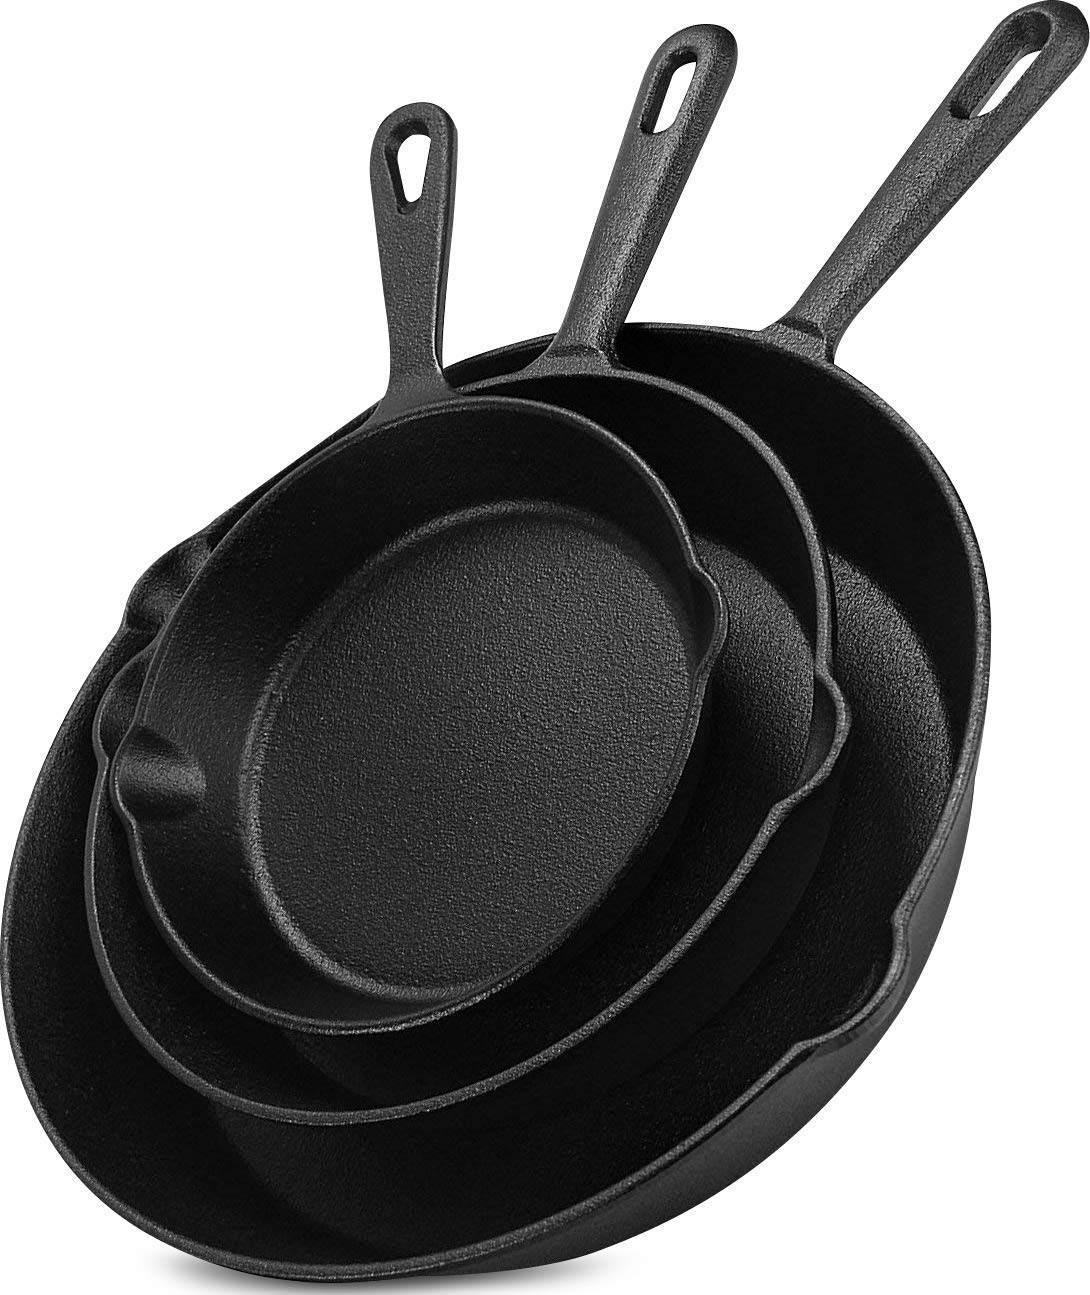 Pre-Seasoned Cast Iron Skillet (Set of 3 Pcs) – 6 Inch, 8 Inch and 10 Inch  – Kichly